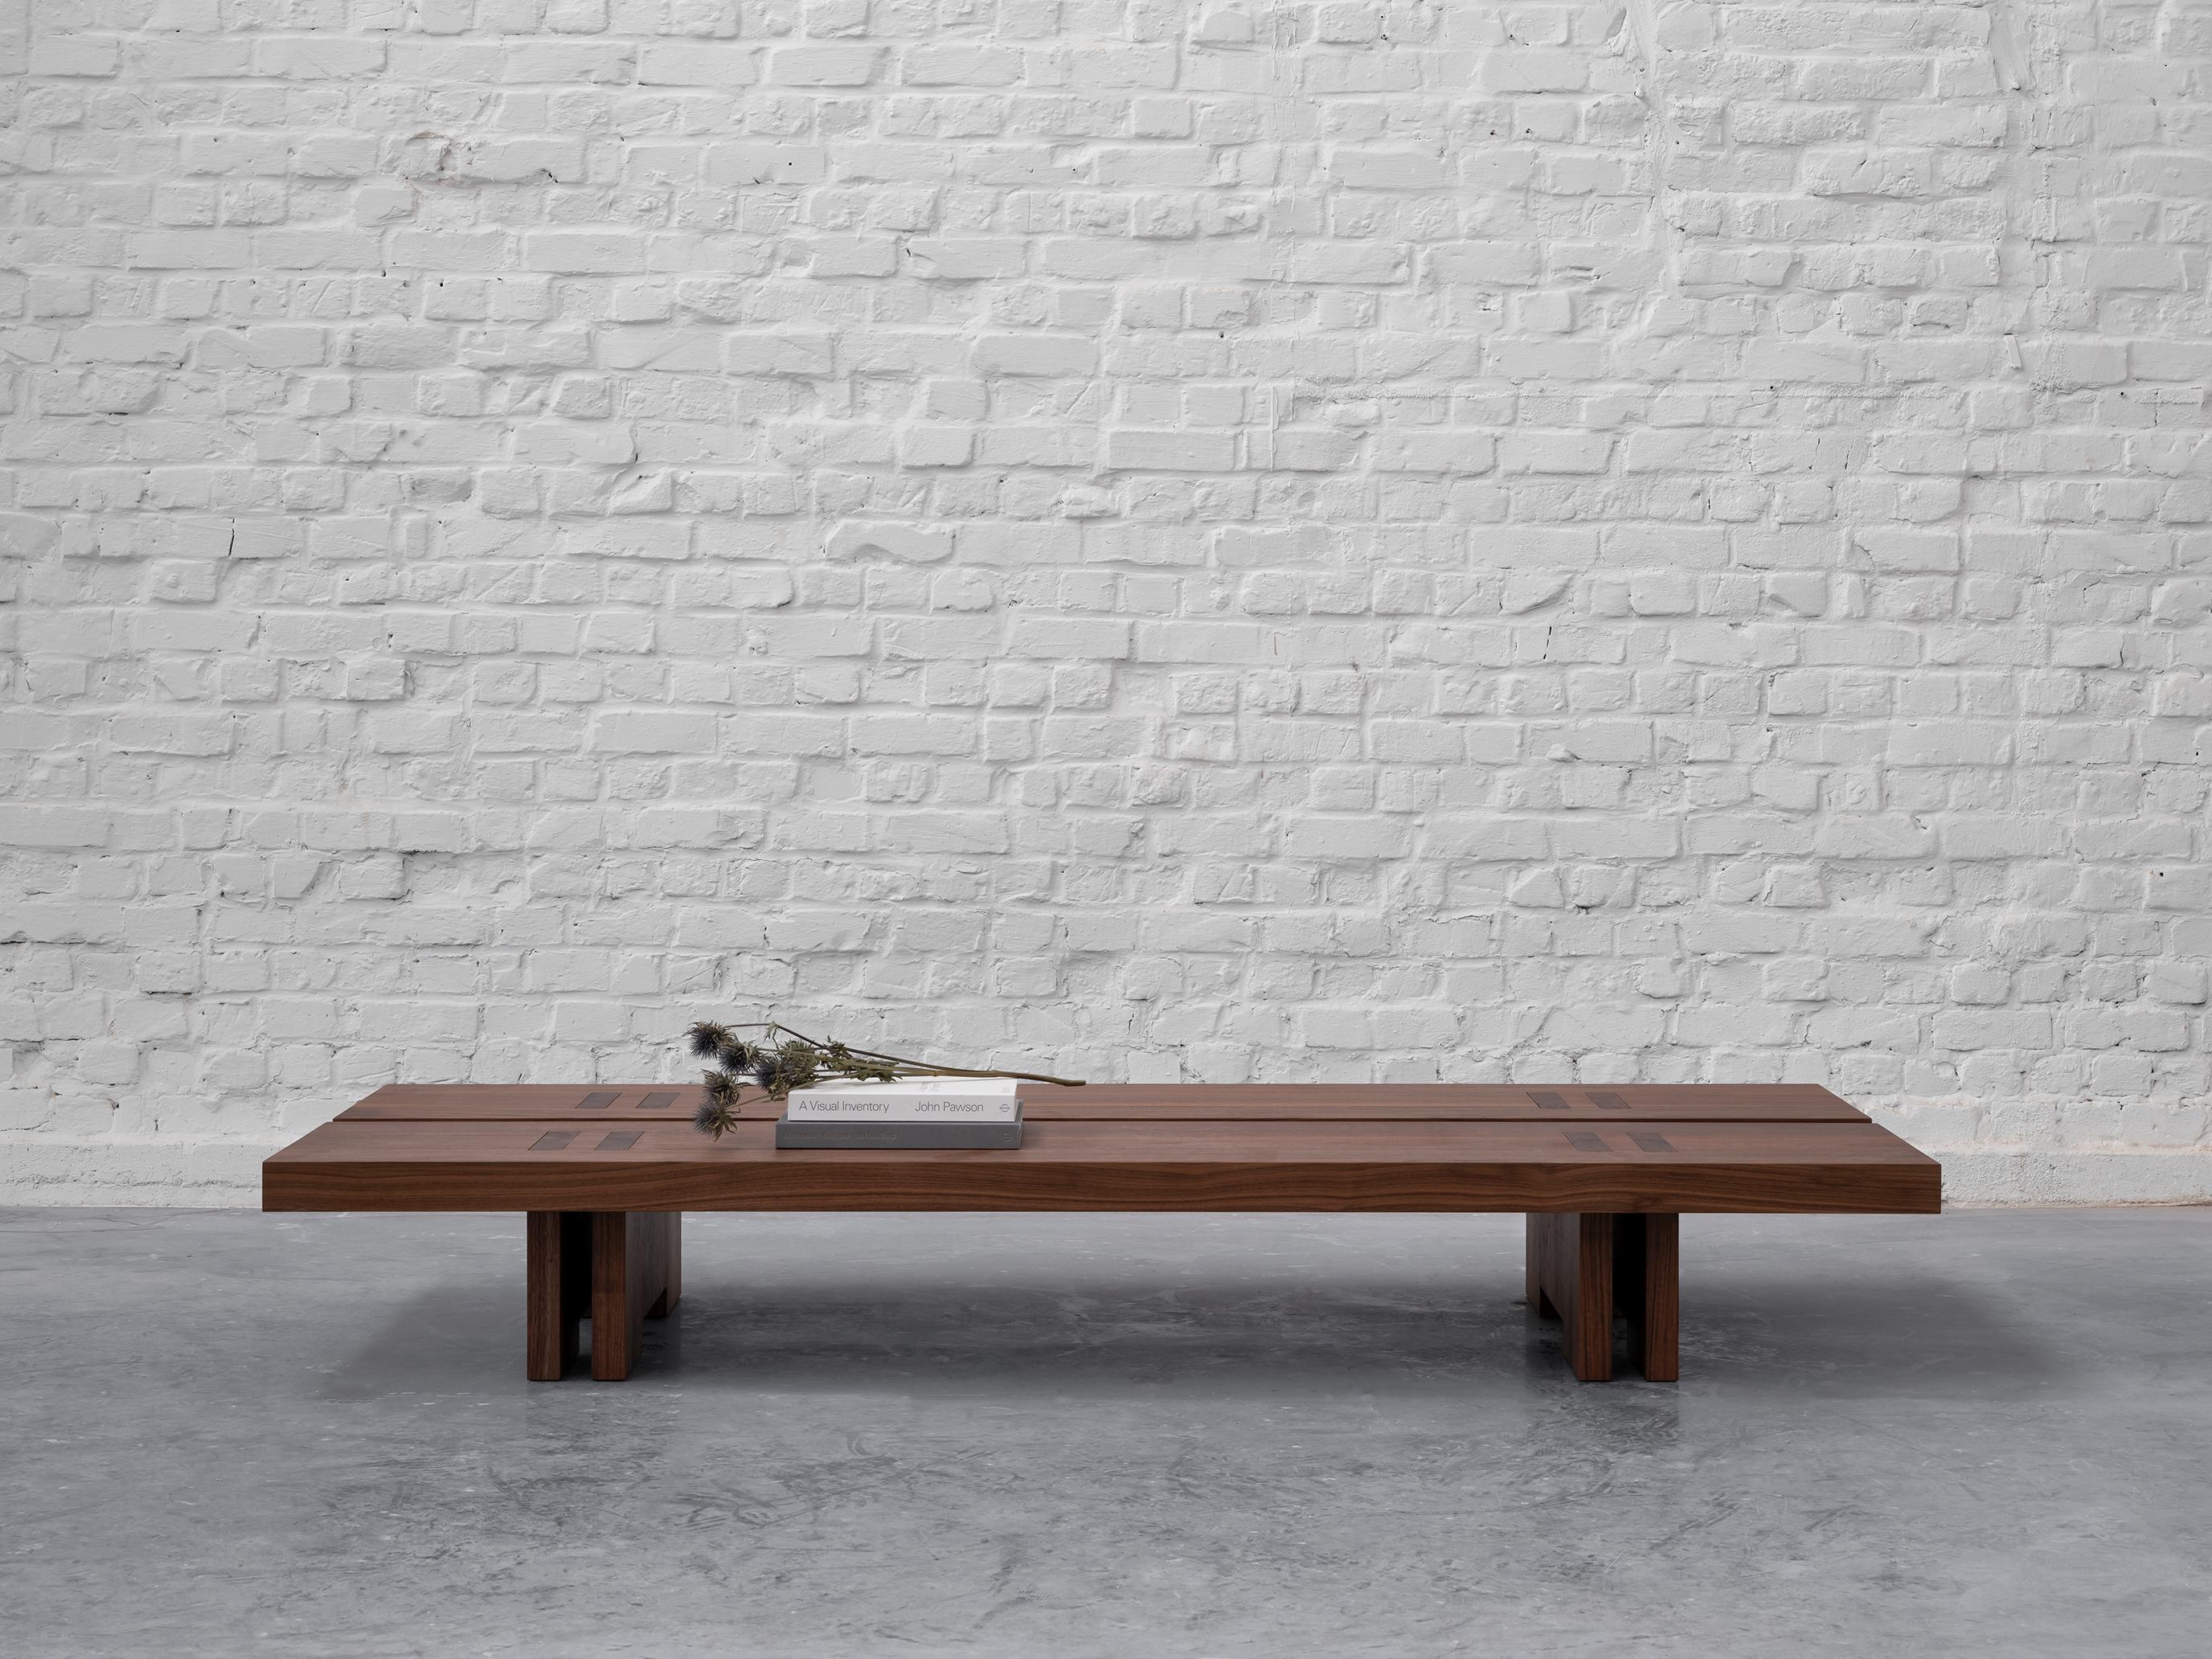 Rift wood coffee table by Andy Kerstens
Dimensions: 160 x 82 x 28 cm
Materials: Walnut
Handmade in Belgium

Available in Solid Larch, Oak and Walnut and various sizes.

The design was created by the need for a simple esthetic with an honest